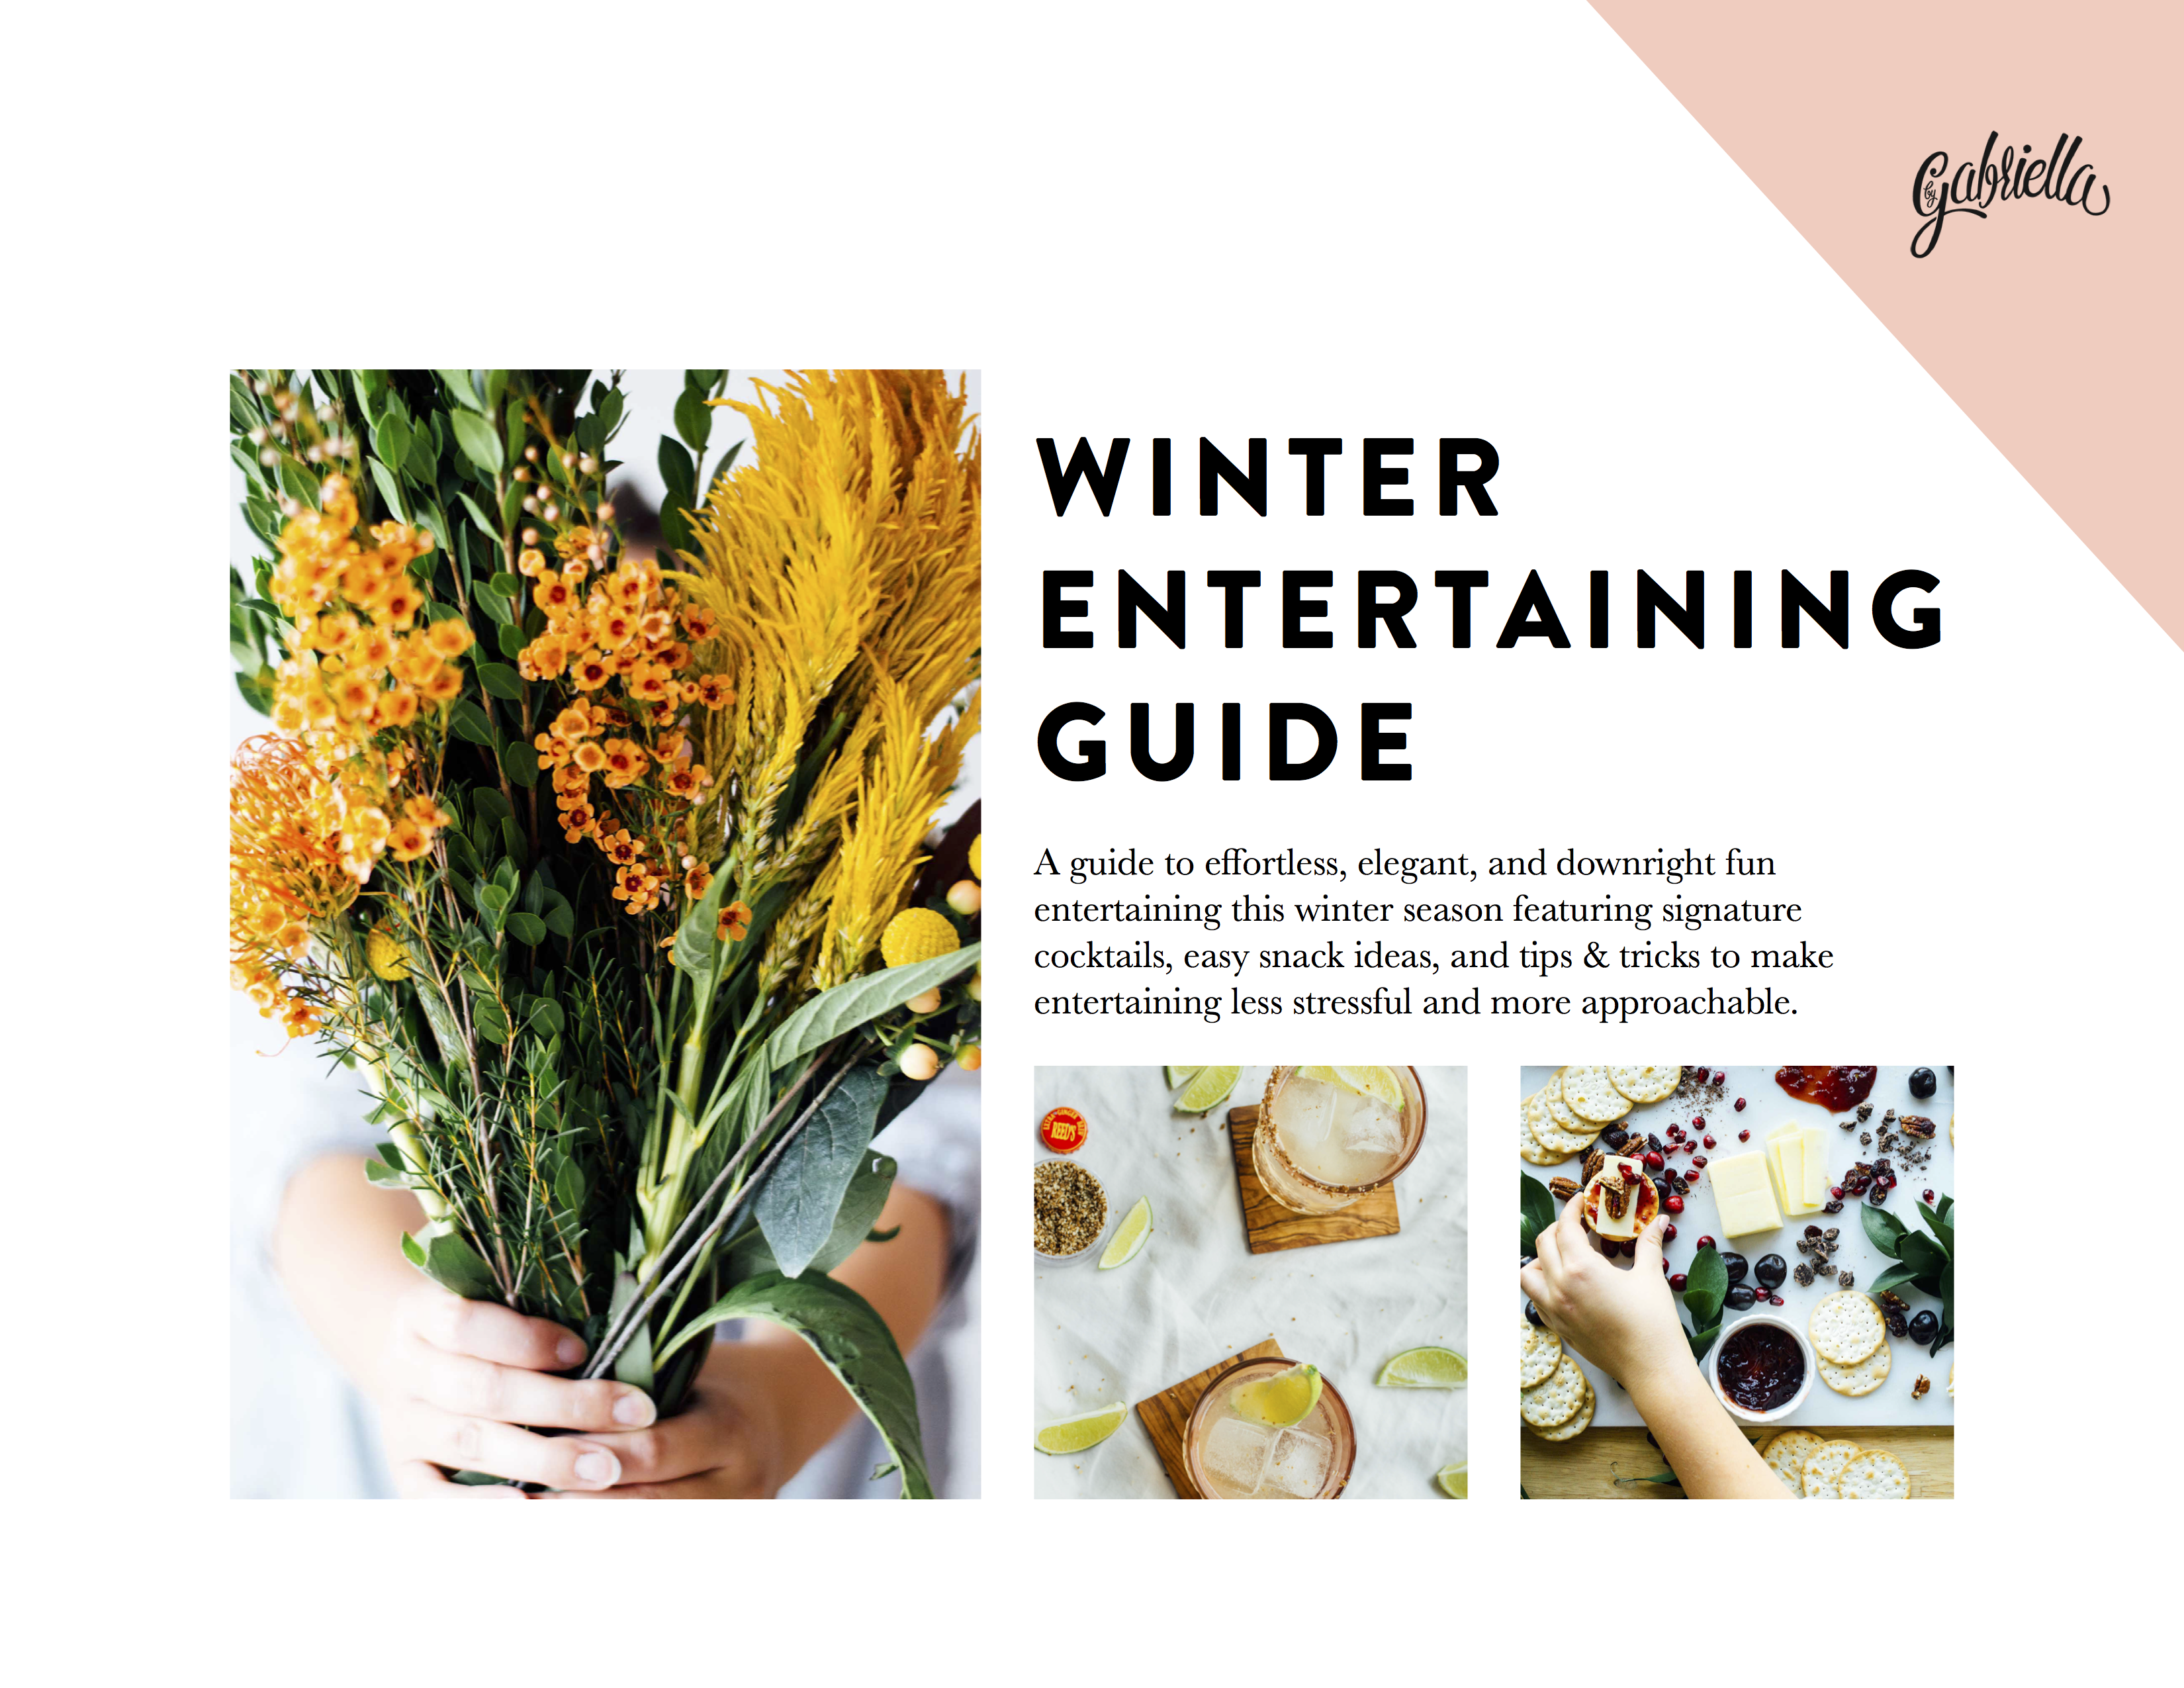 A free copy of By Gabriella's Winter Entertaining Guide featuring easy winter entertaining tips & tricks! | bygabriella.co